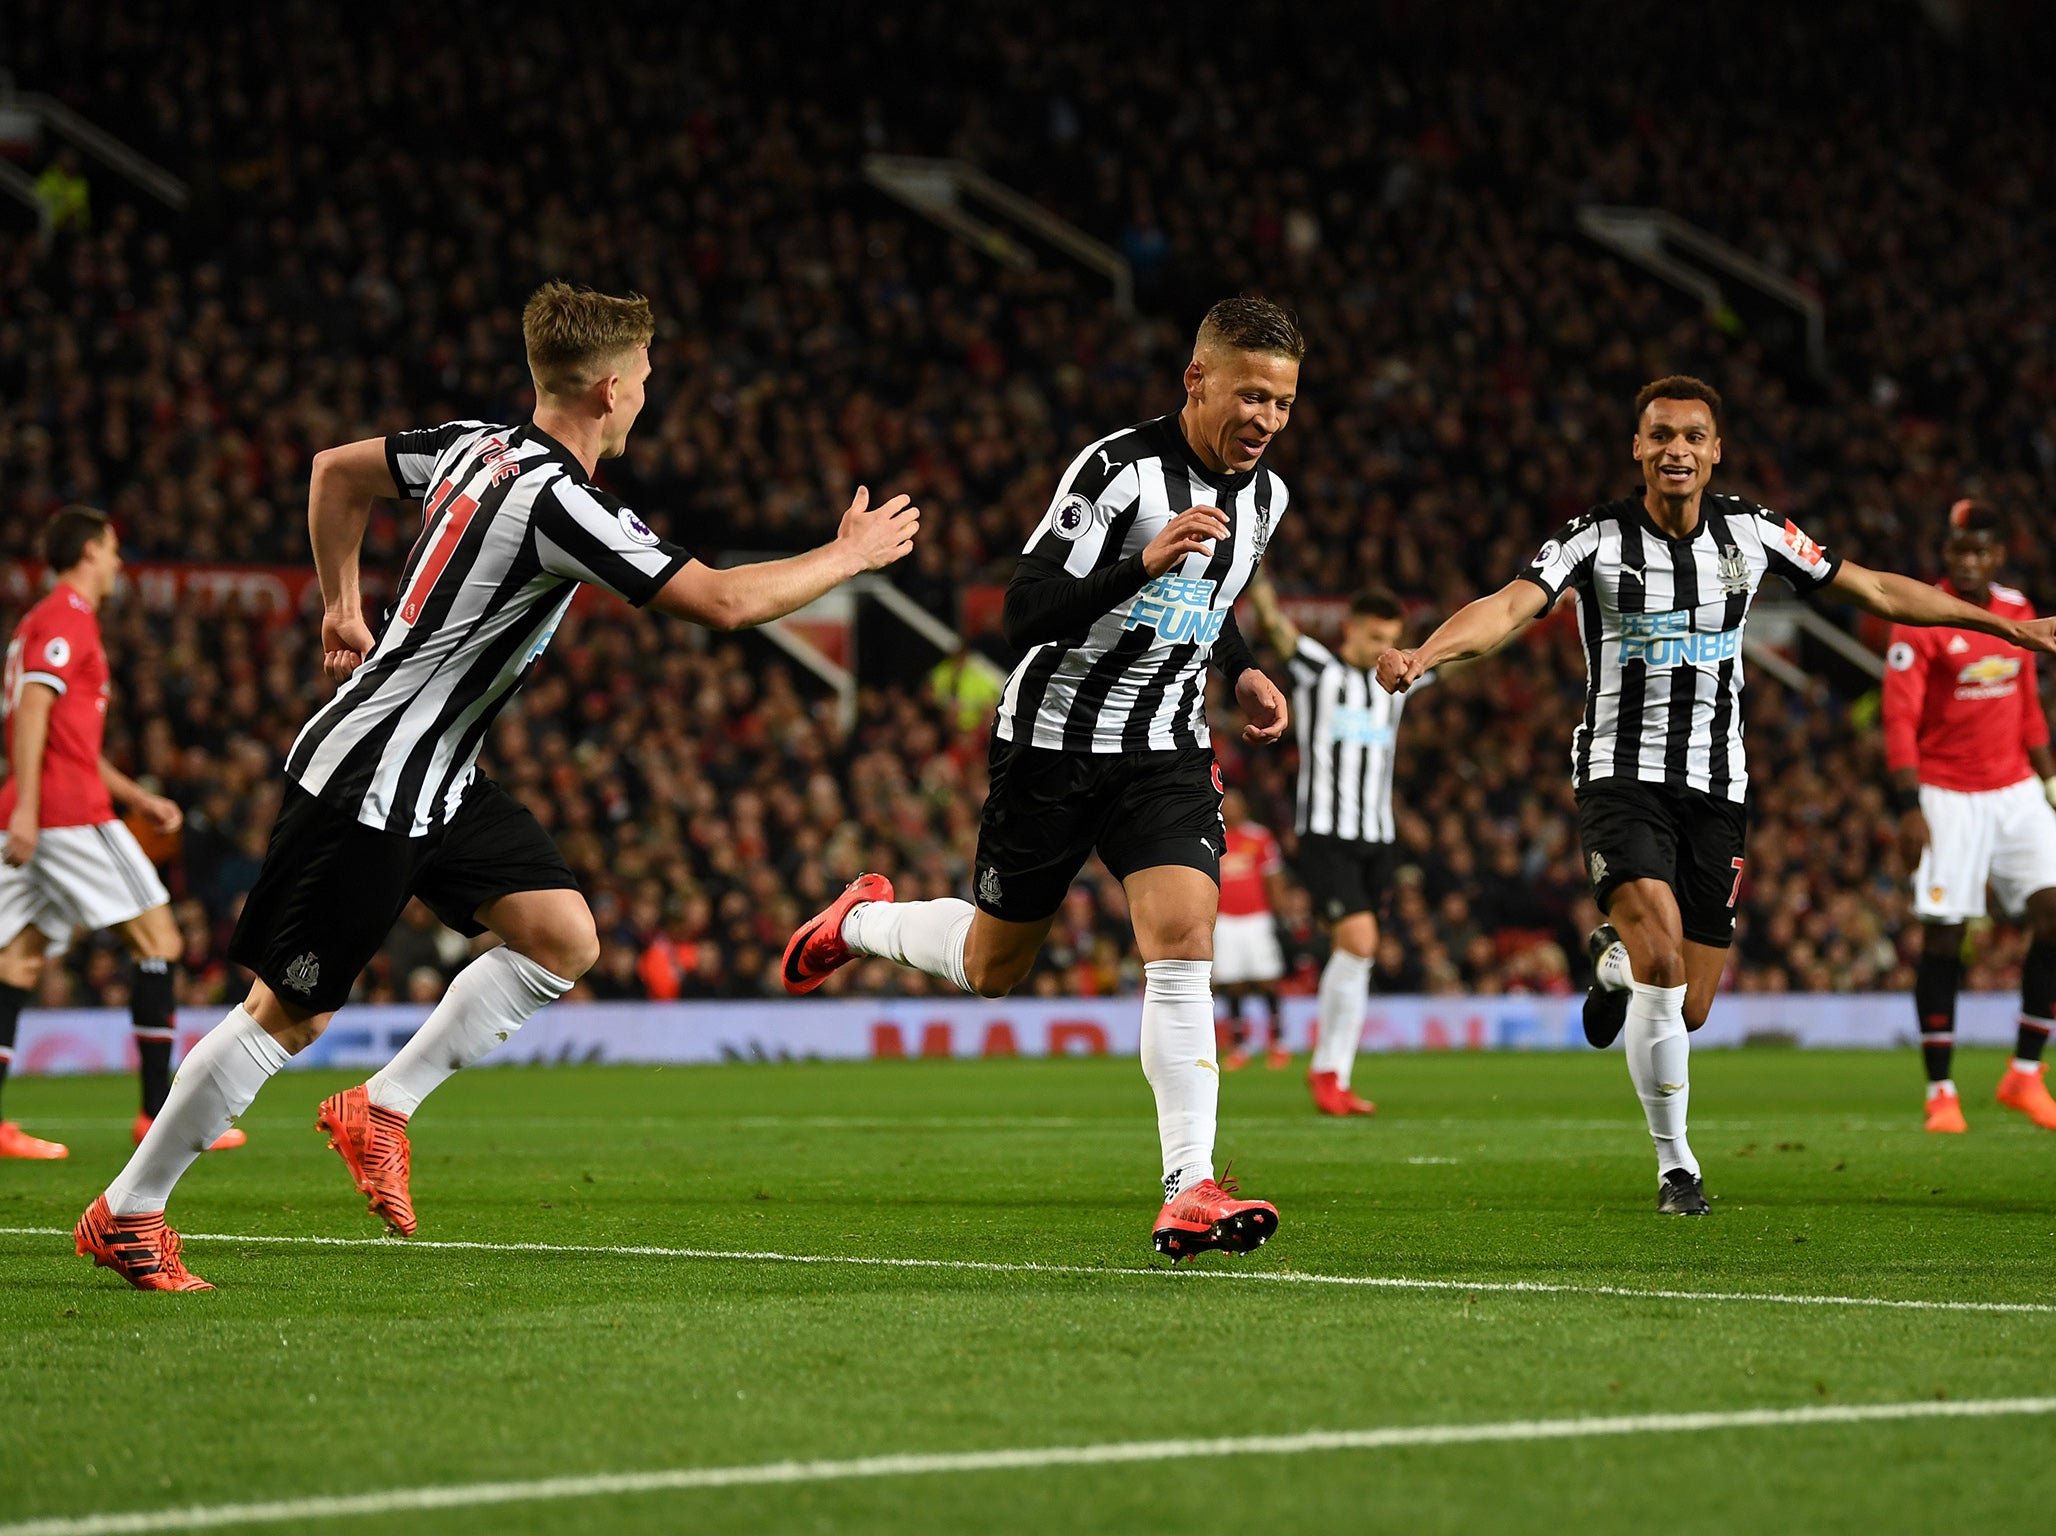 Gayle gave Newcastle an unlikely lead